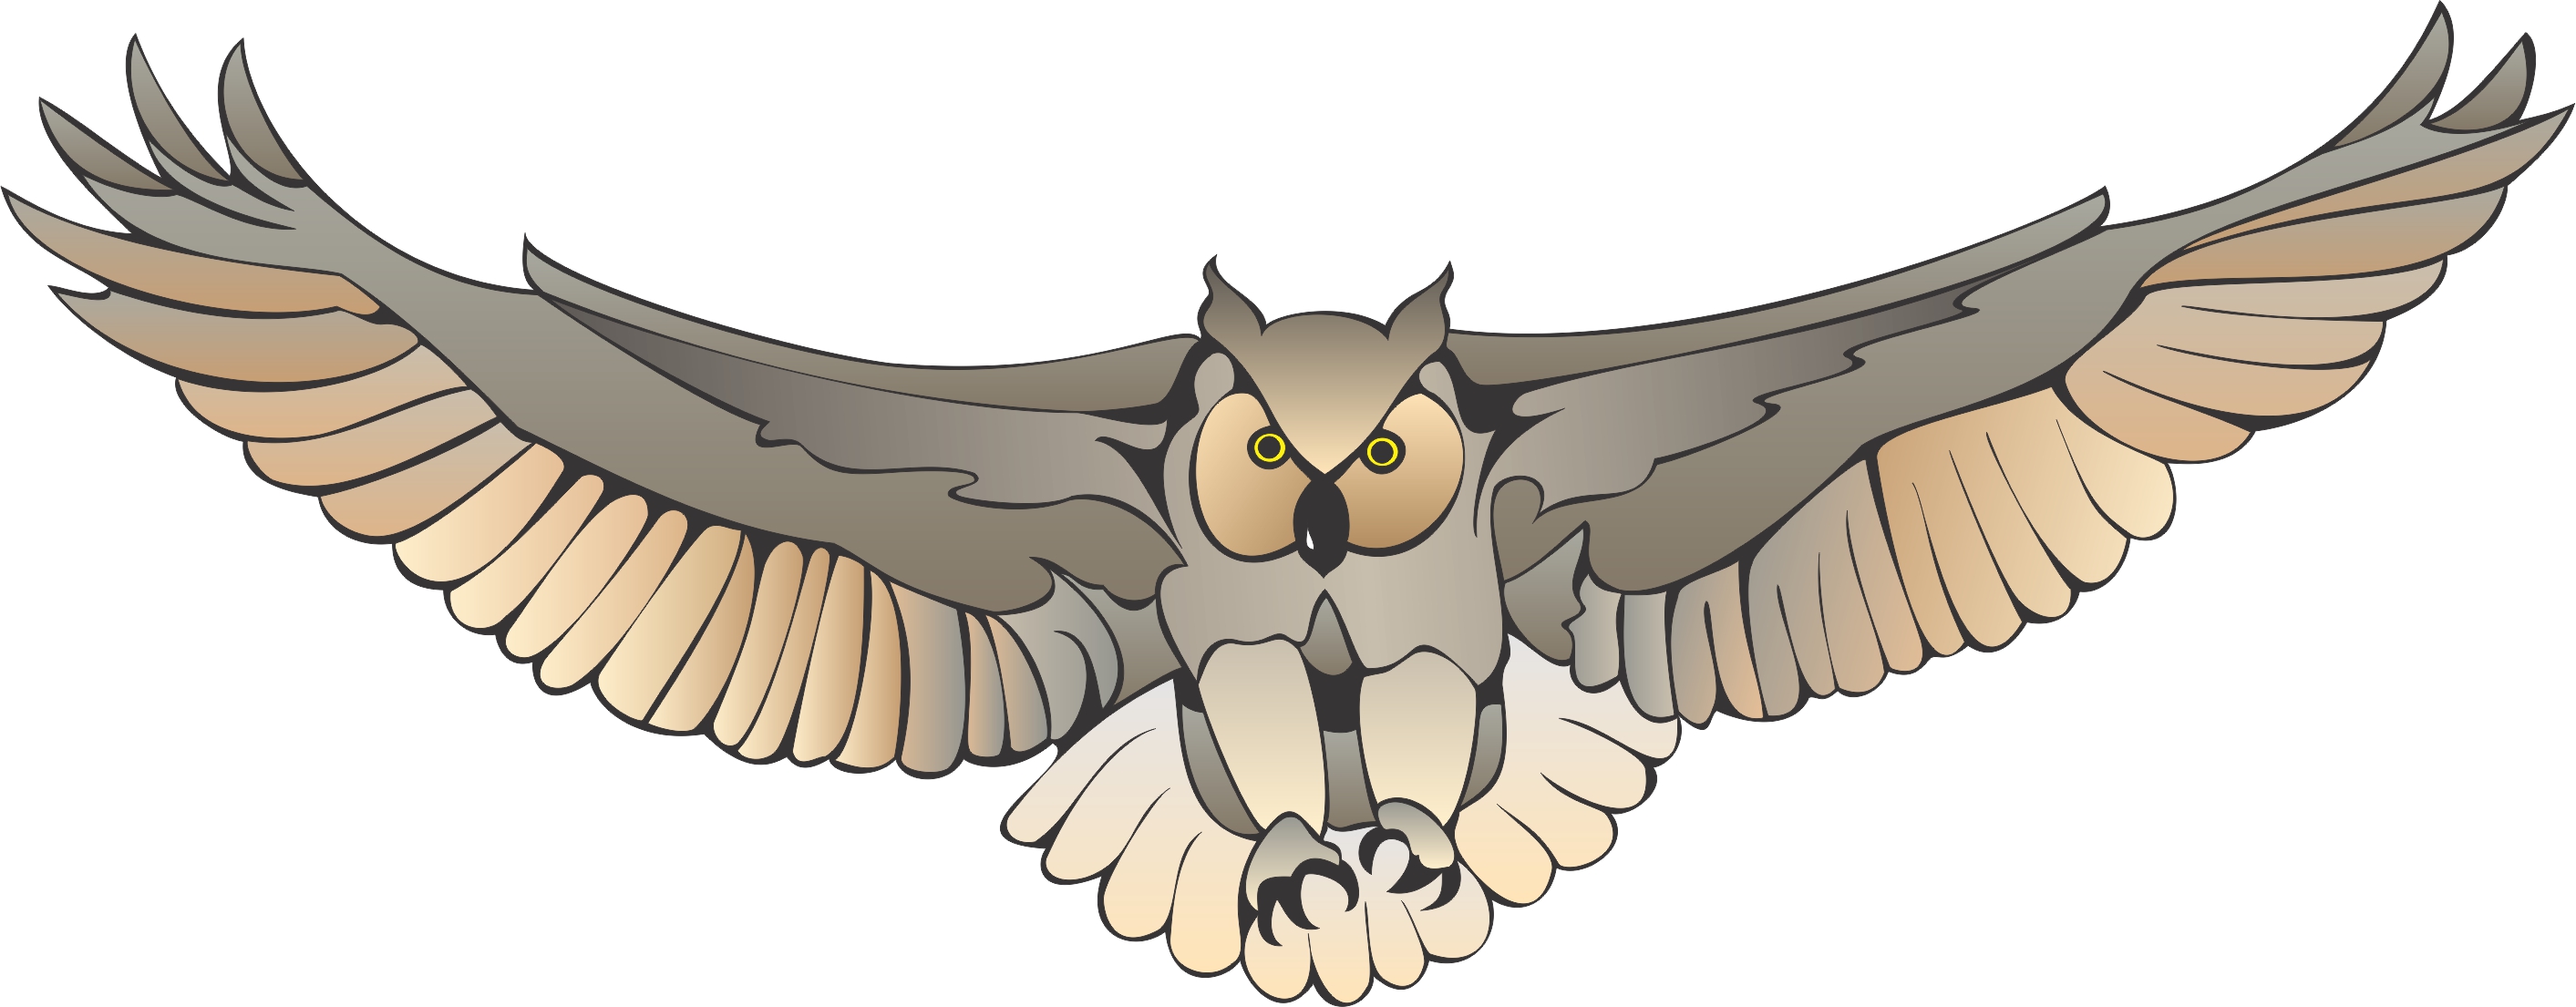 owl flying clipart - photo #1